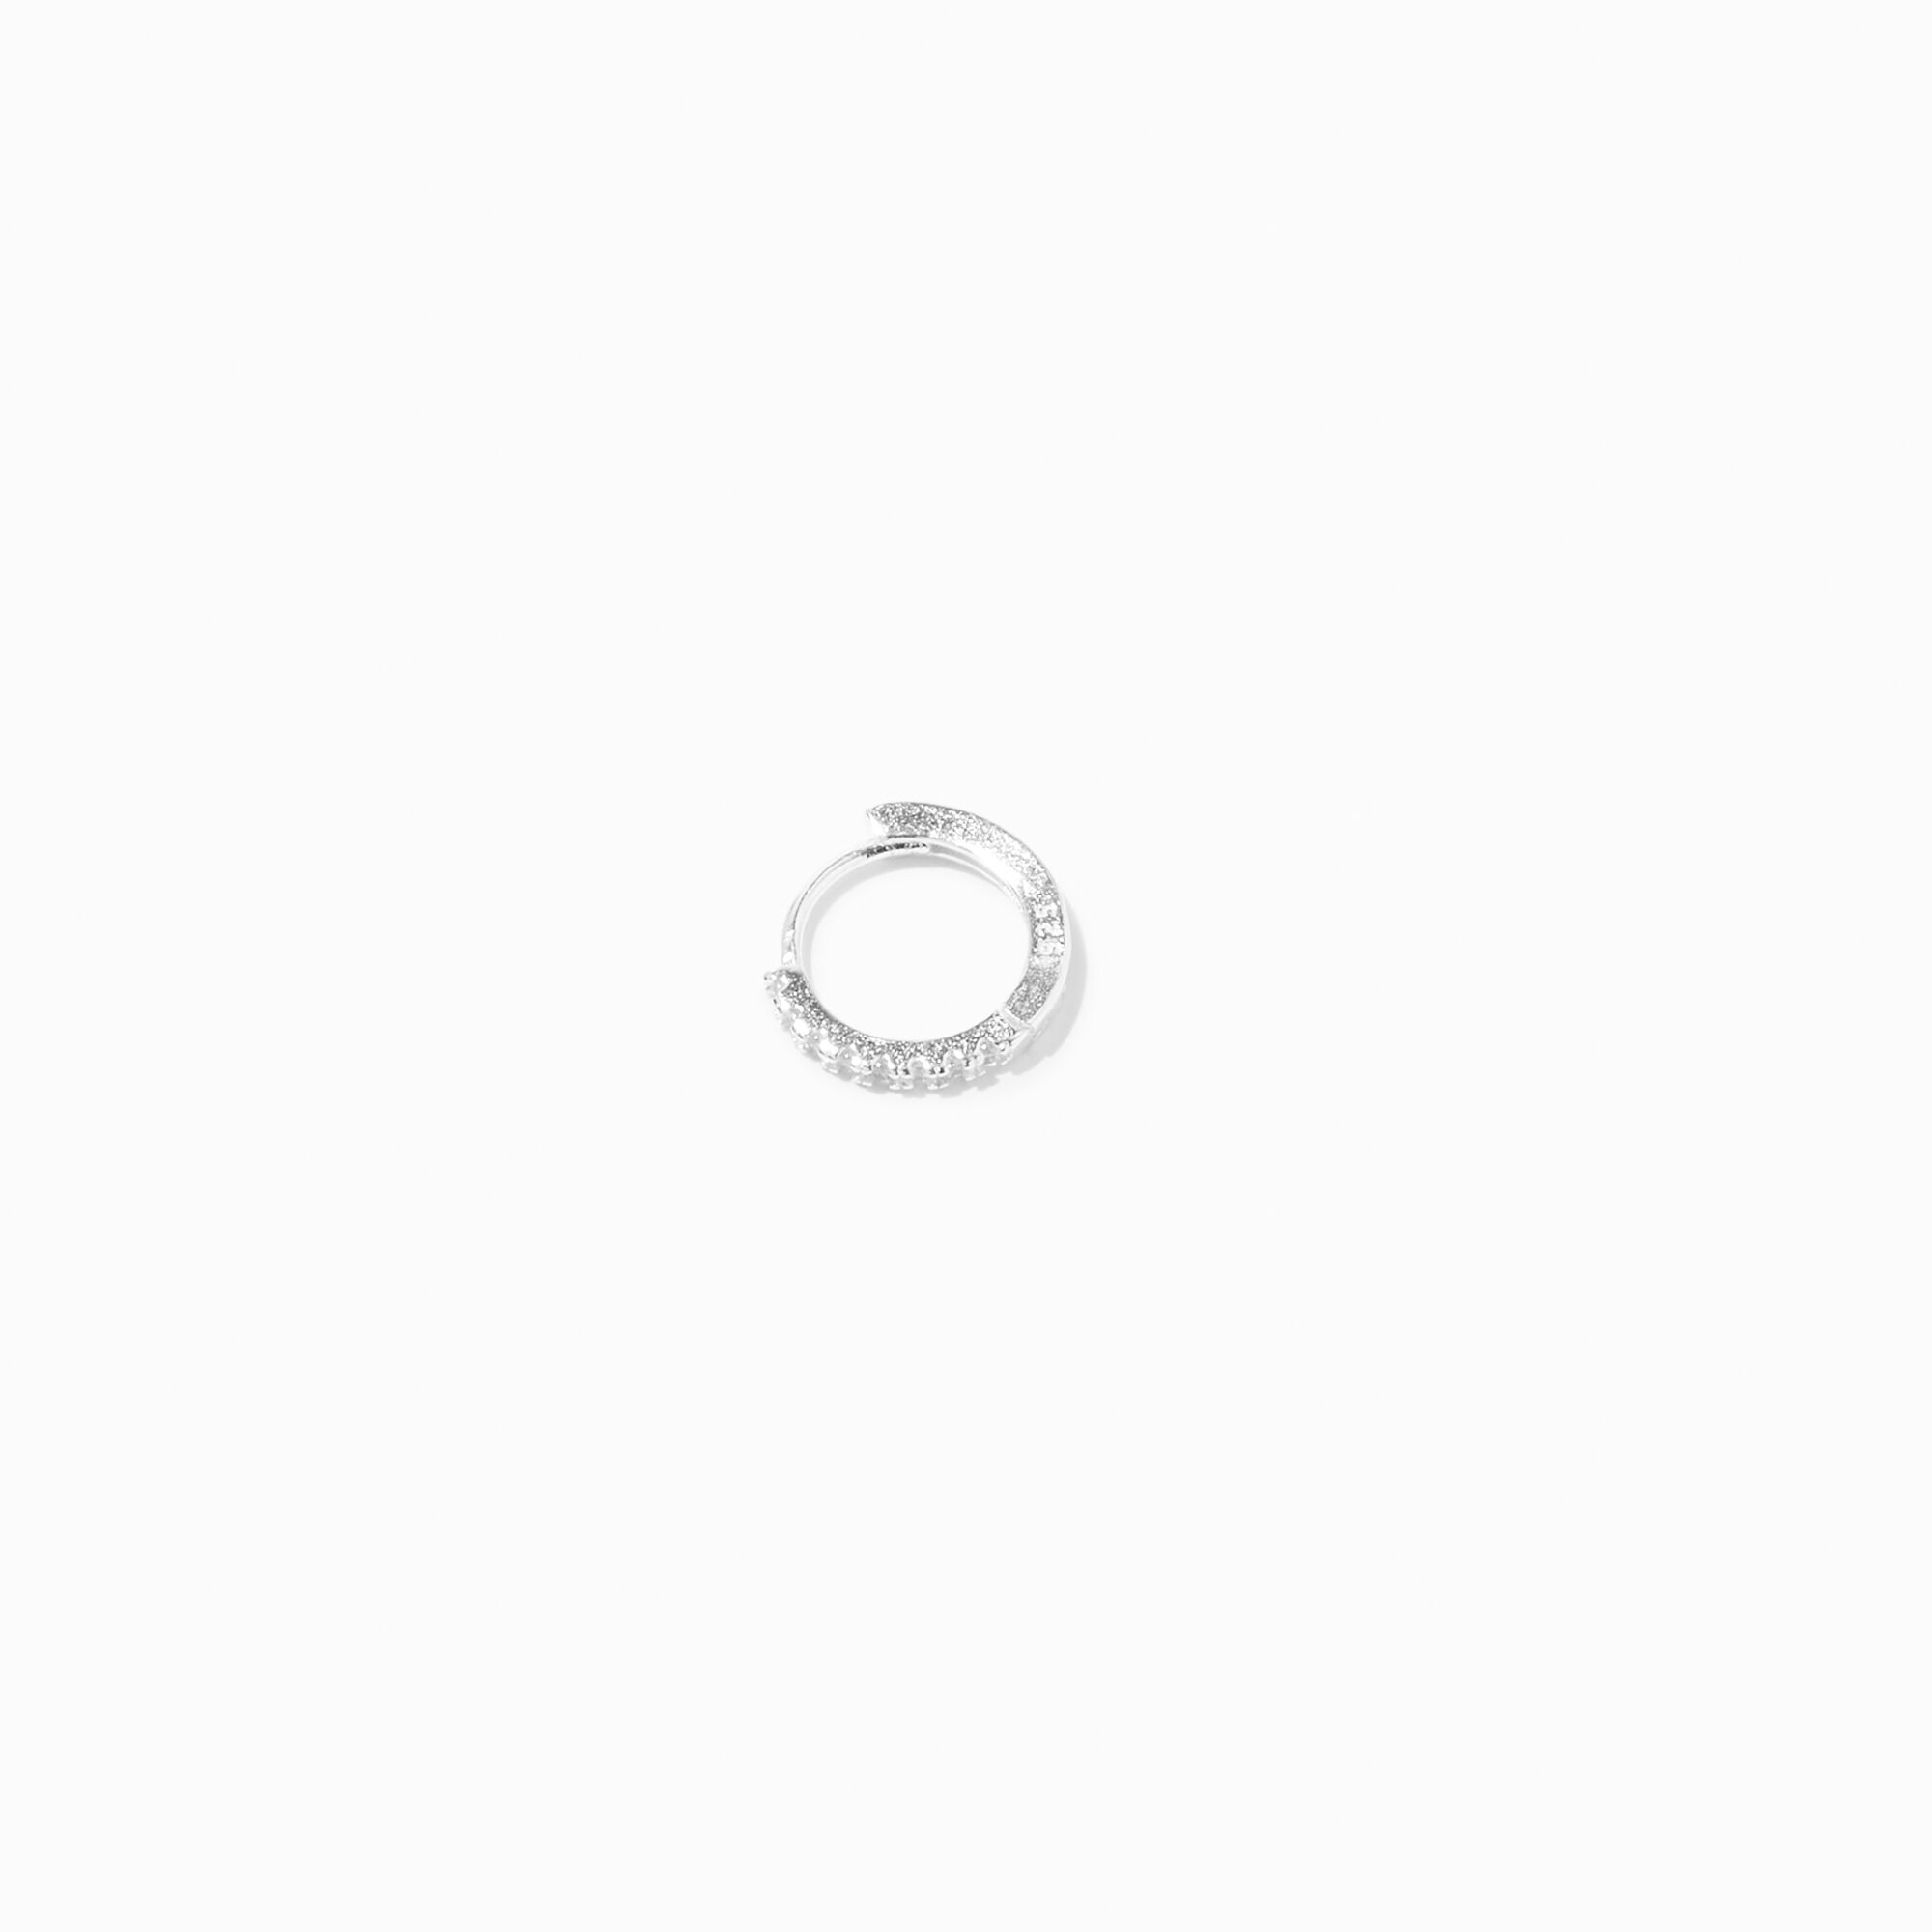 View Claires 20G Cartilage Crystal Hoop Earring Silver information